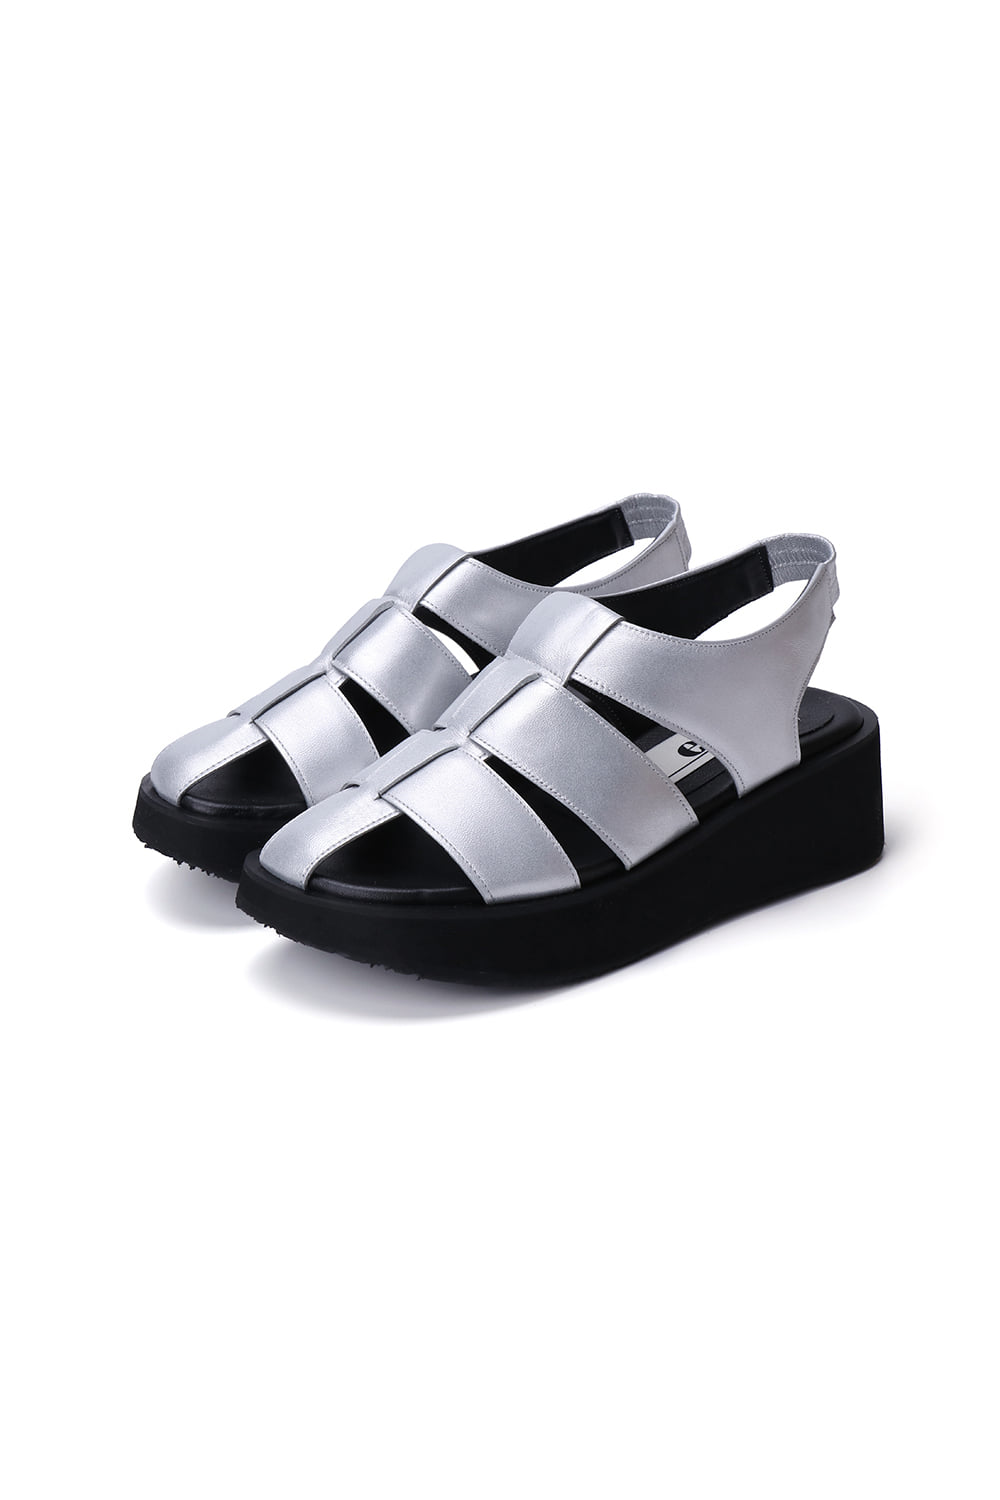 (EXCLUSIVE) OLA CHUNKY SANDALS [SILVER]